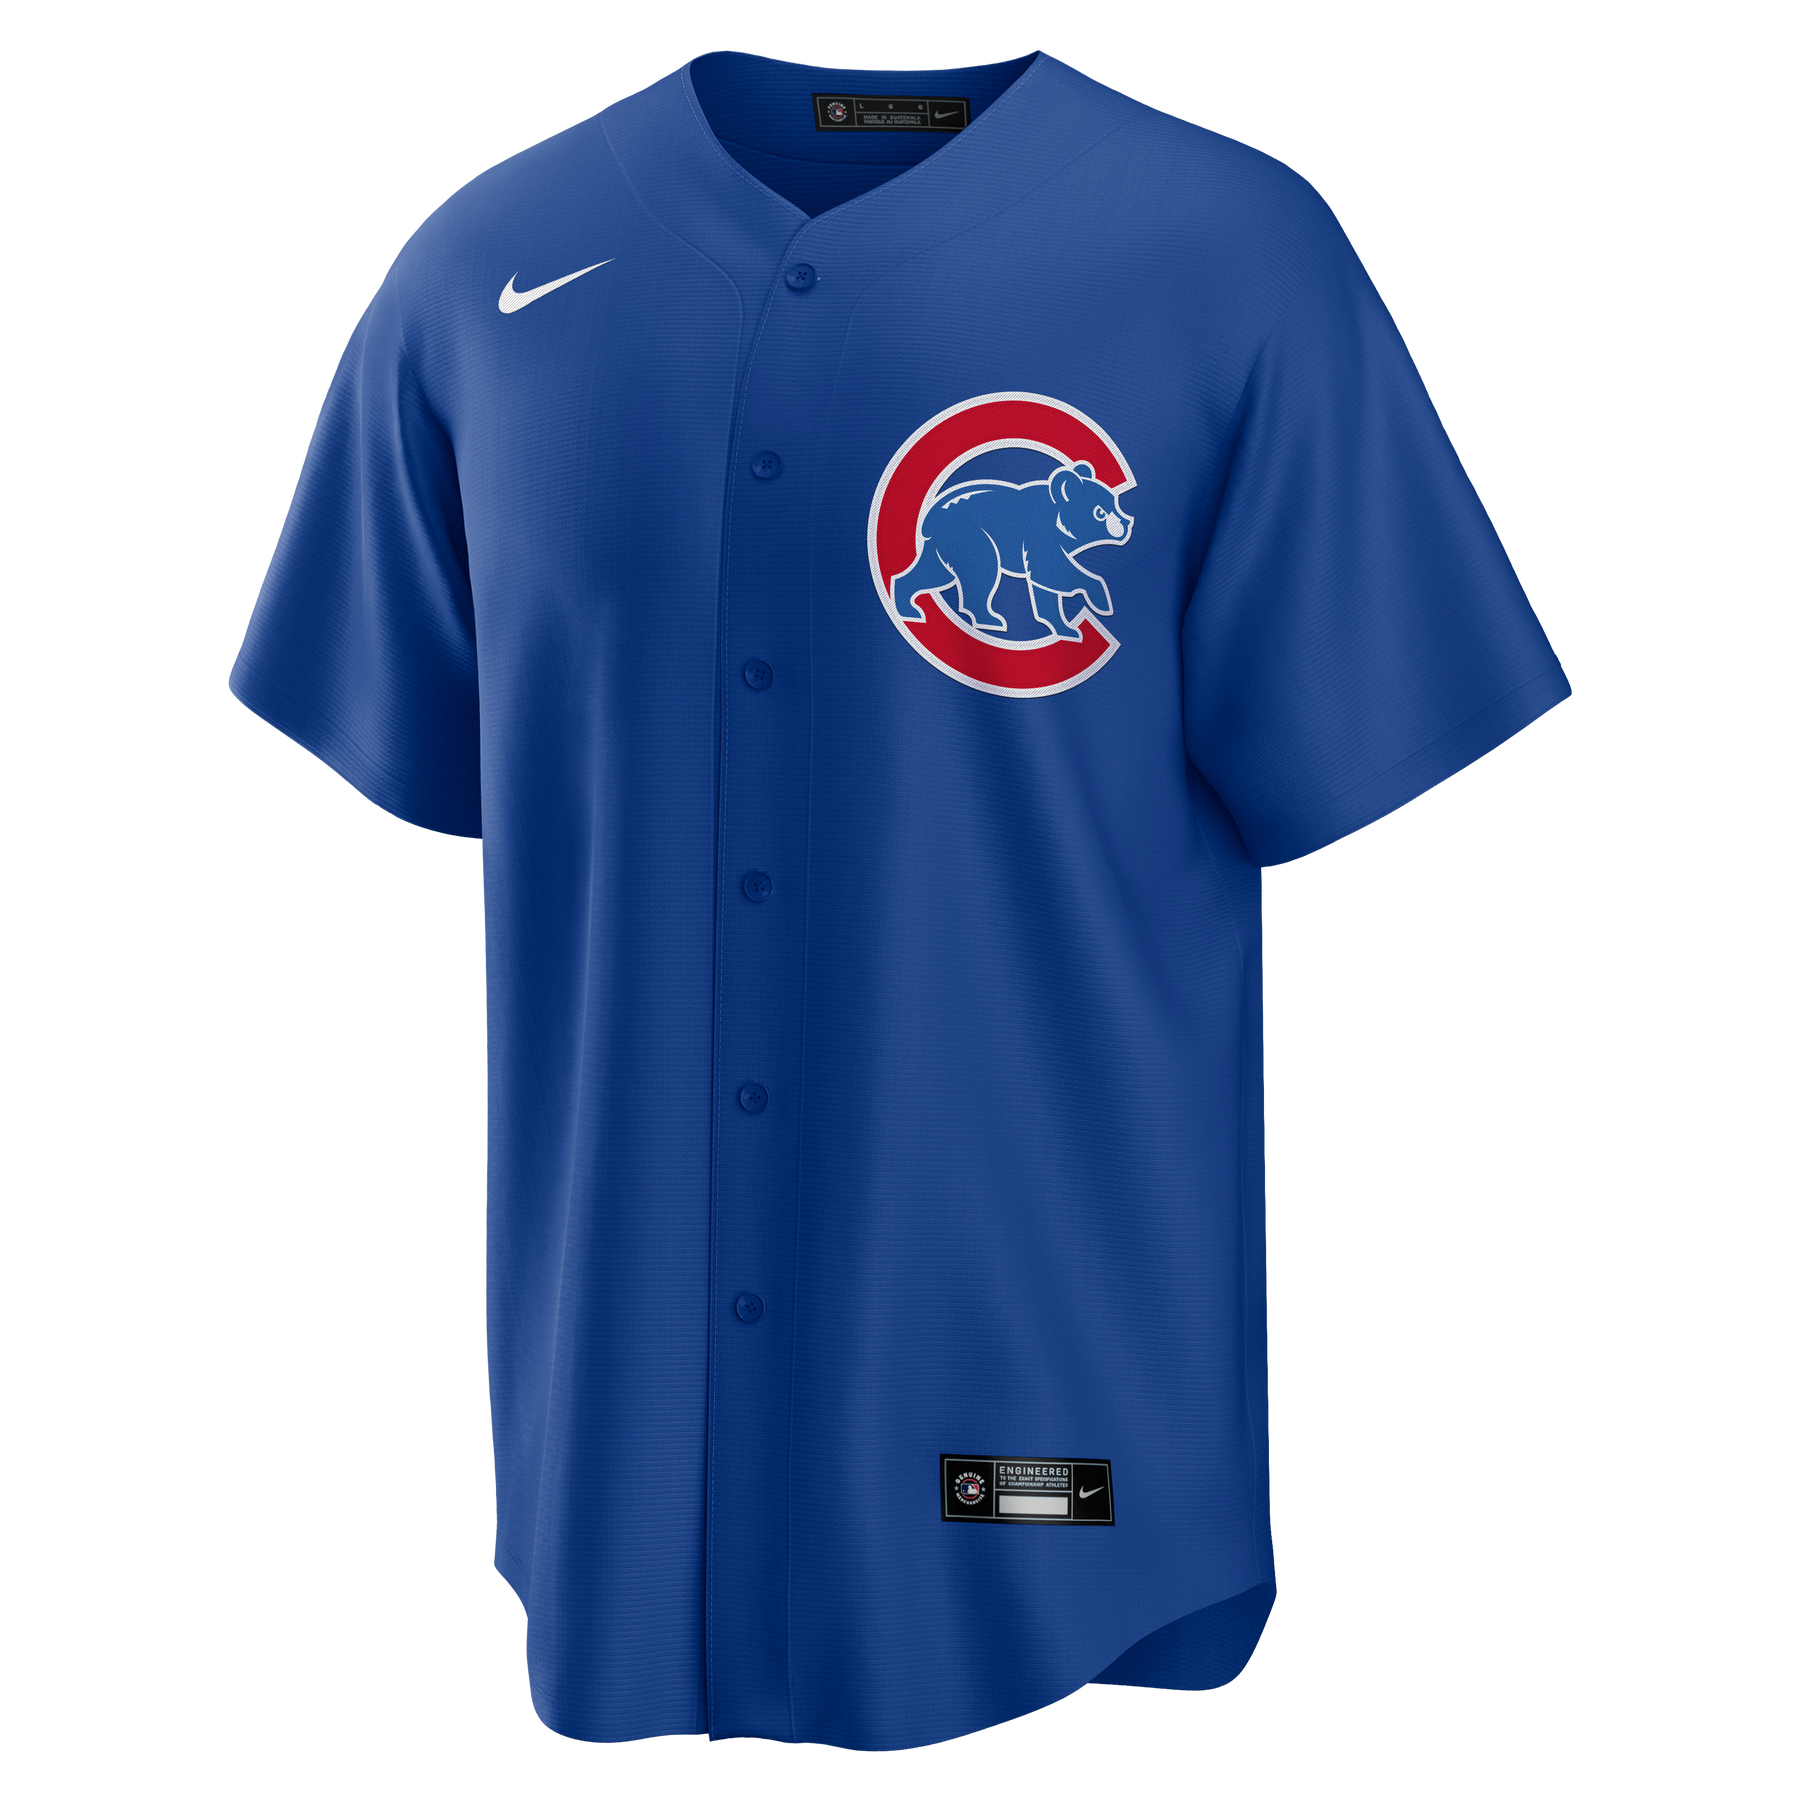 Men's Chicago Cubs Dansby Swanson Nike White Replica Player Jersey